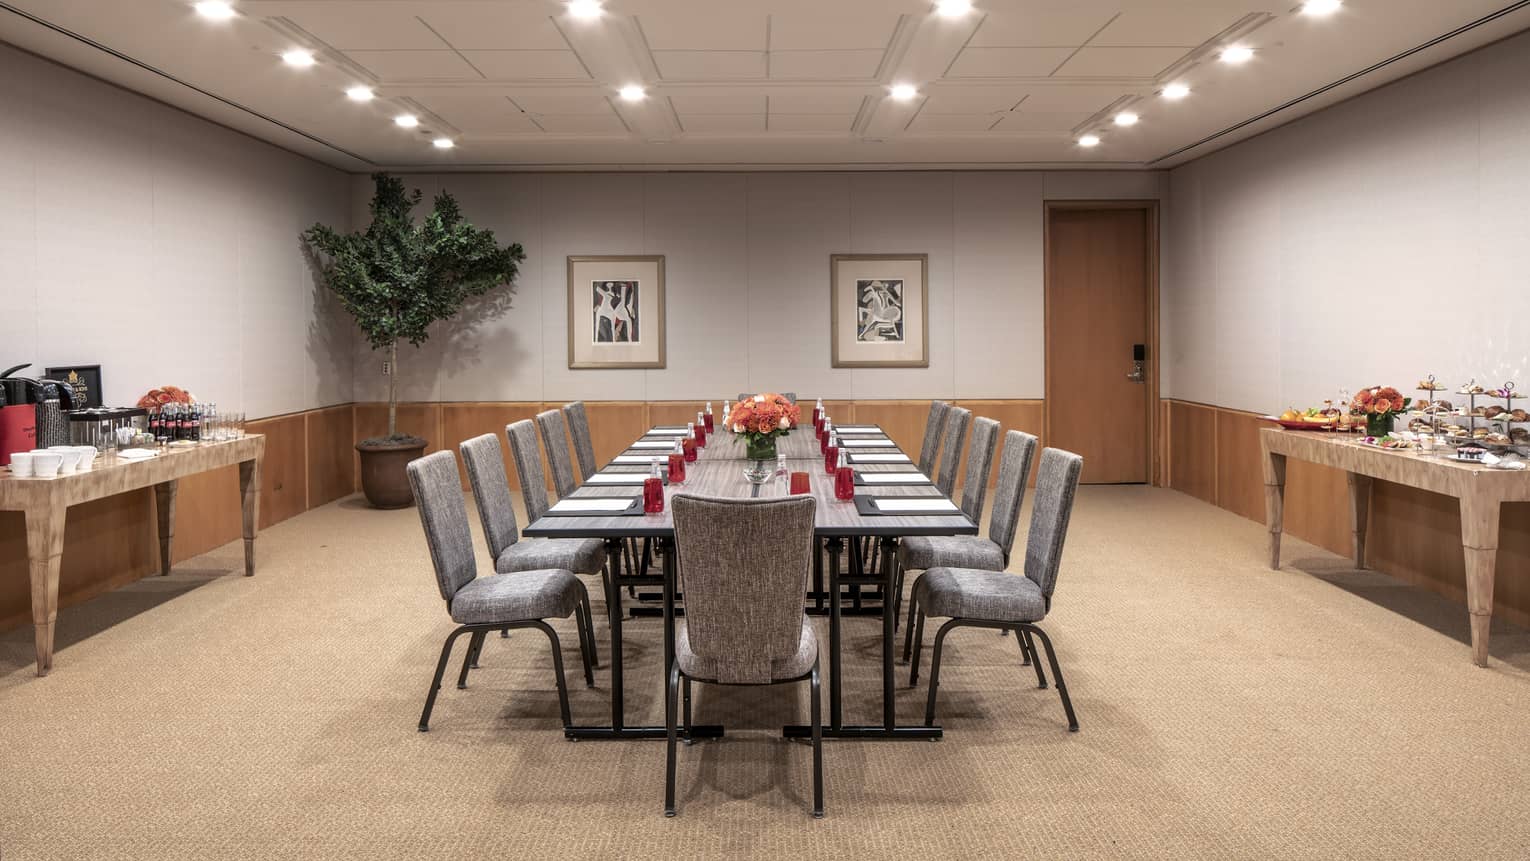 A boardroom with a long rectangular gray table that is set with red water glasses, a black folder, white paper and a orange floral centerpiece. 